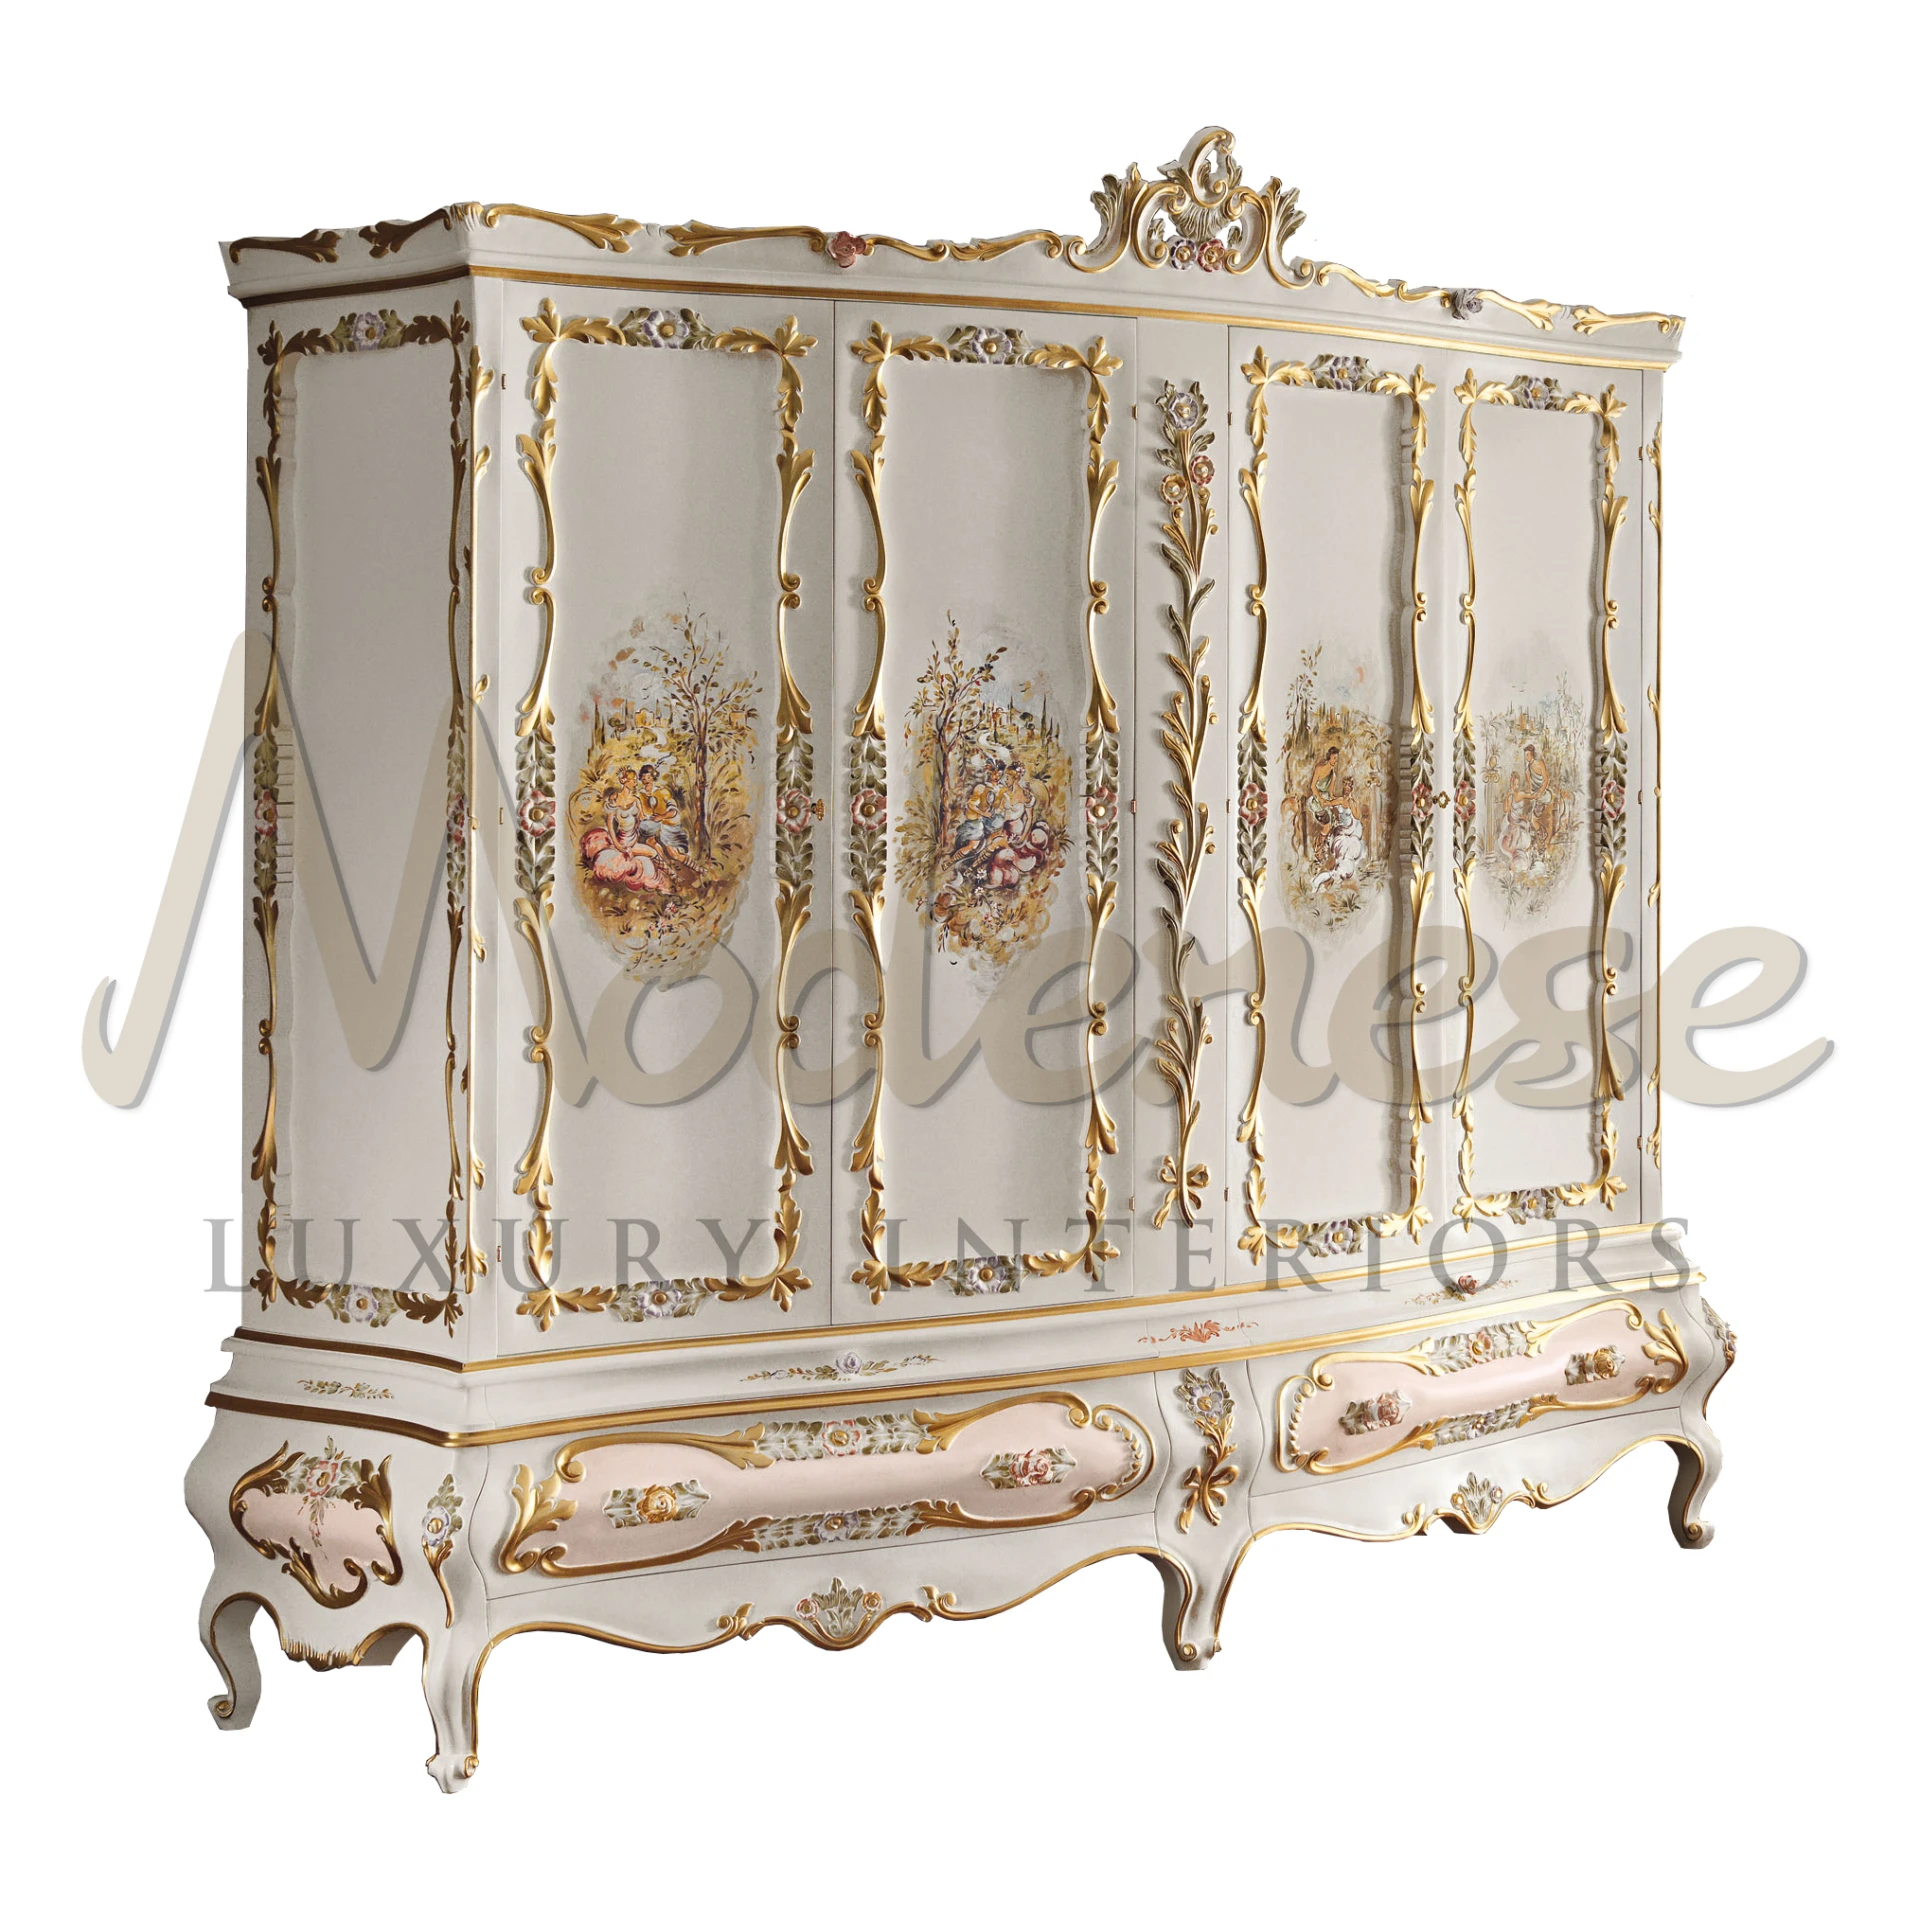  Baroque-inspired hand-carved wardrobe with gold and floral details.                                                                                              